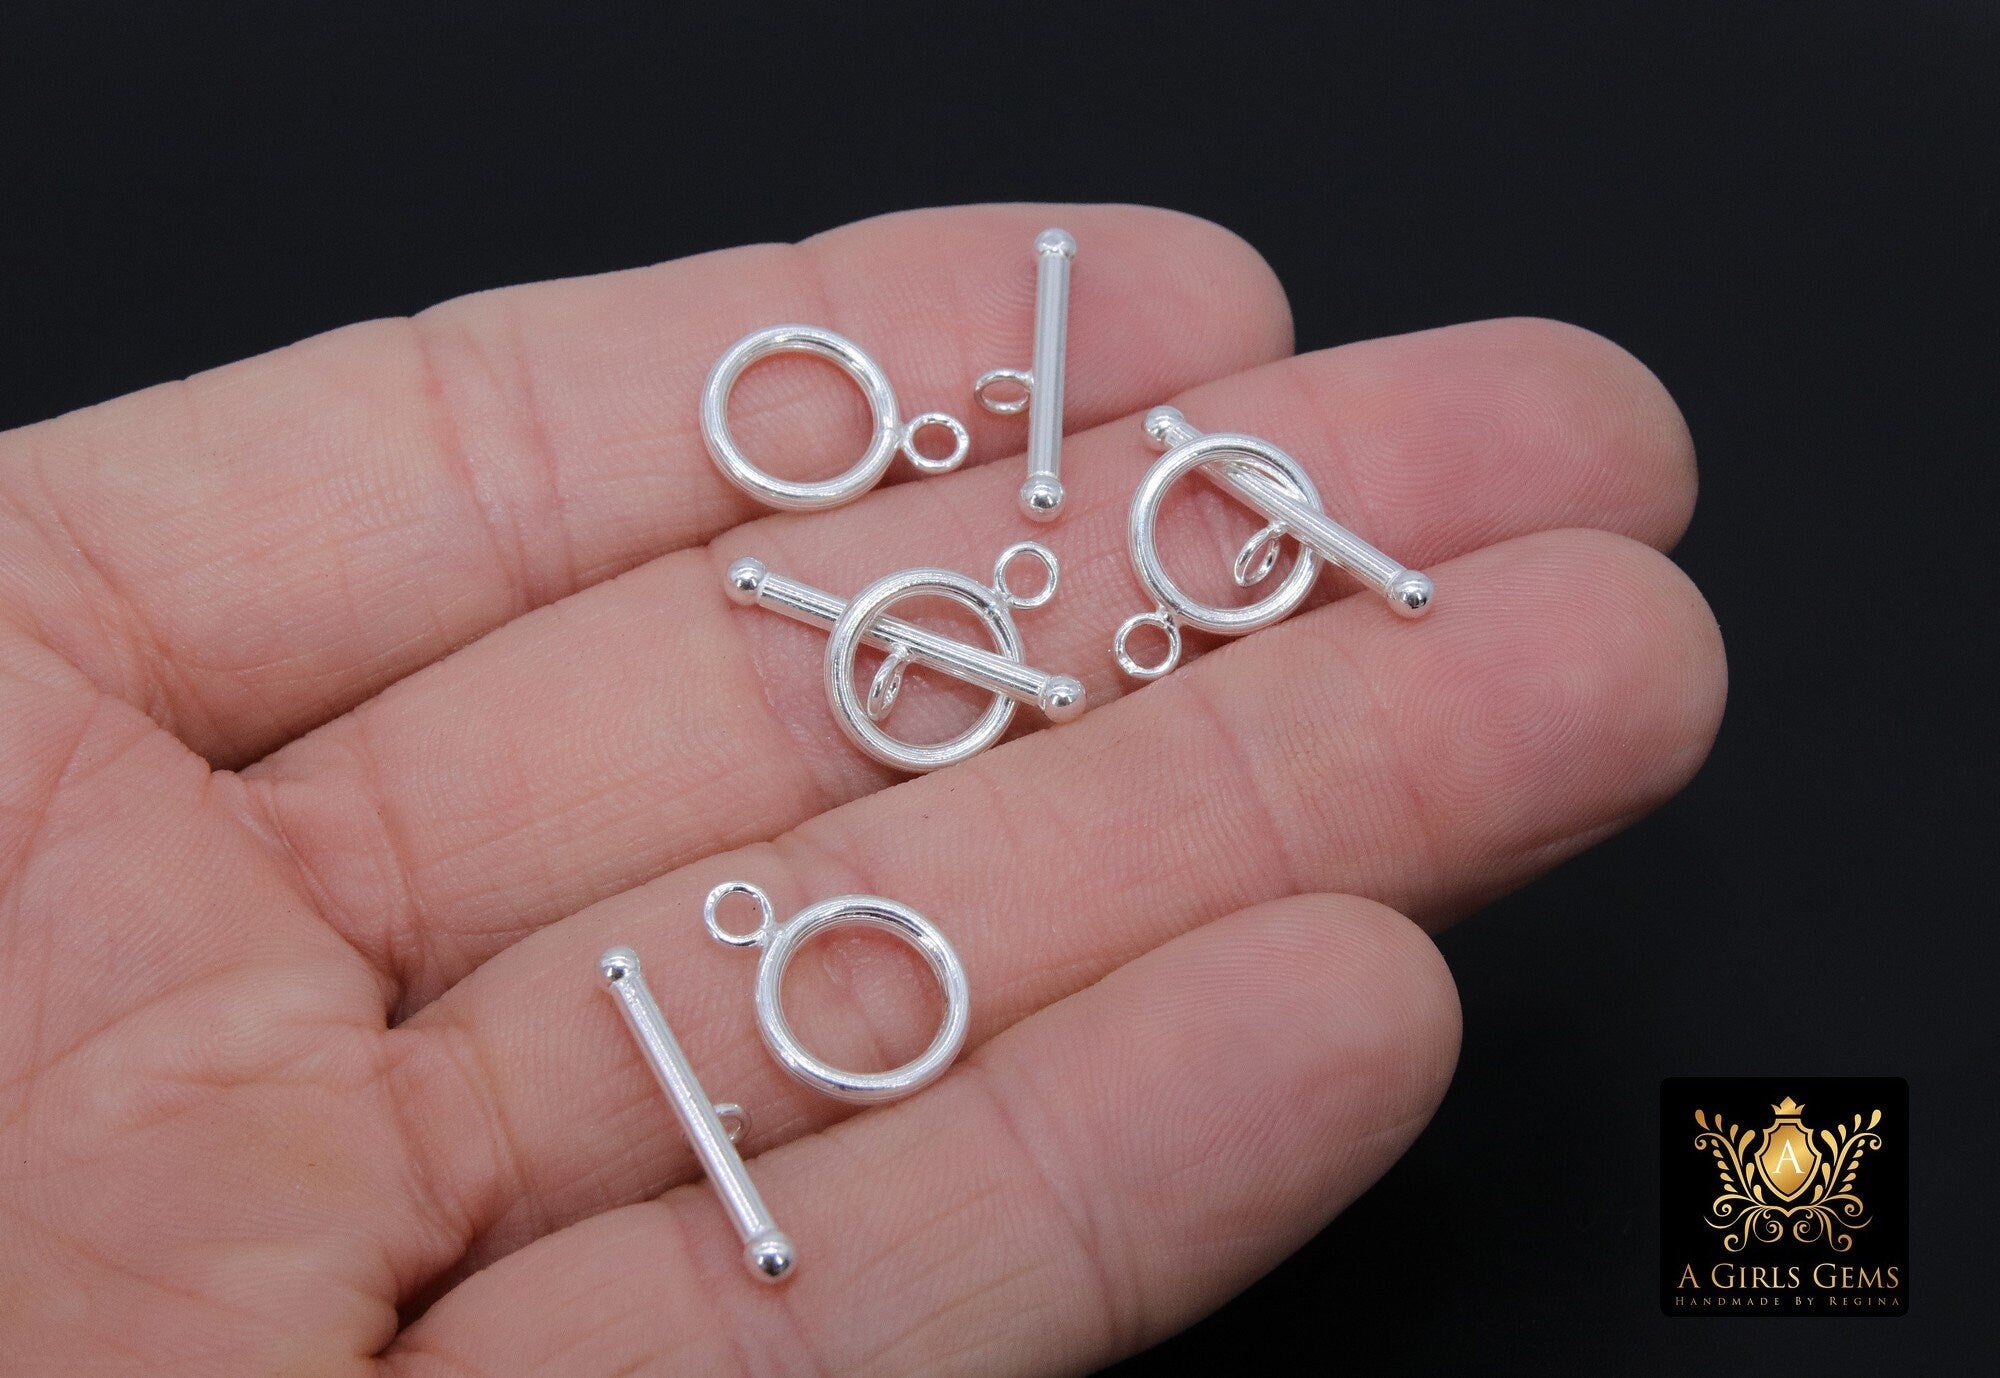 925 Sterling Silver Toggle Clasp Set, Ball End 16 x 12 mm Toggle Ring #744, 22 mm Thick T Bar Stamped 925 Clasps